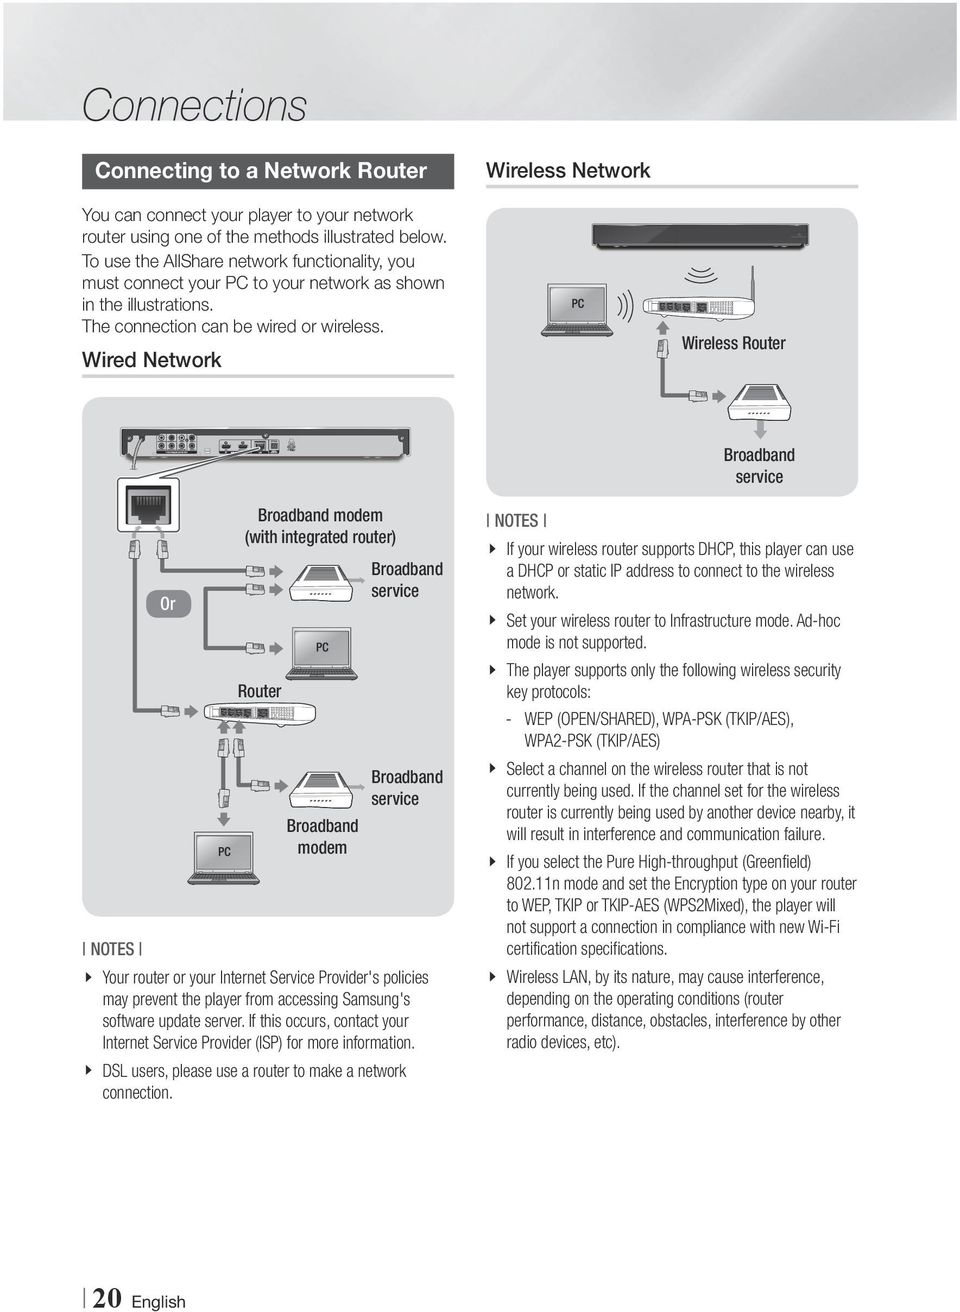 Wireless Router Wired Network Broadband modem (with integrated router) Broadband service Or Router Broadband modem Broadband service NOTEs \\ Your router or your Internet Service Provider's policies